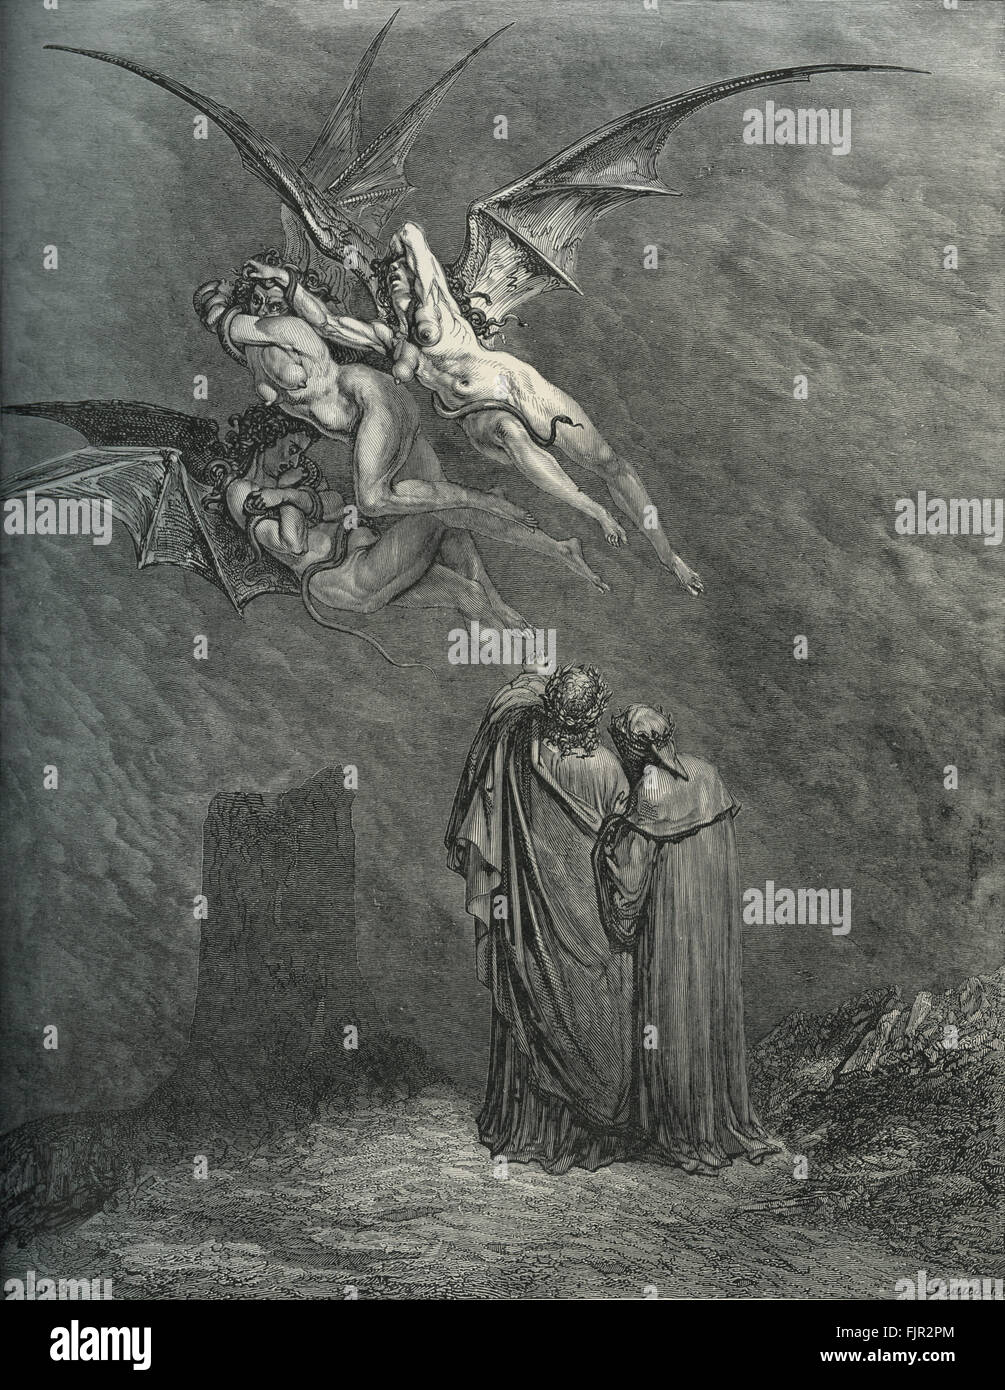 Dante Alighieri, La Divina Commedia, L'Inferno (The Divine Comedy, Hell) - Canto IX (9): illustration by Gustave Doré for line 46  'Mark thou each dire erynnis' Dante, Italian poet, c. 29 May 1265 – 13/14 September 1321. Doré, French artist, 6 January 1832 – 23 January 1883 Stock Photo